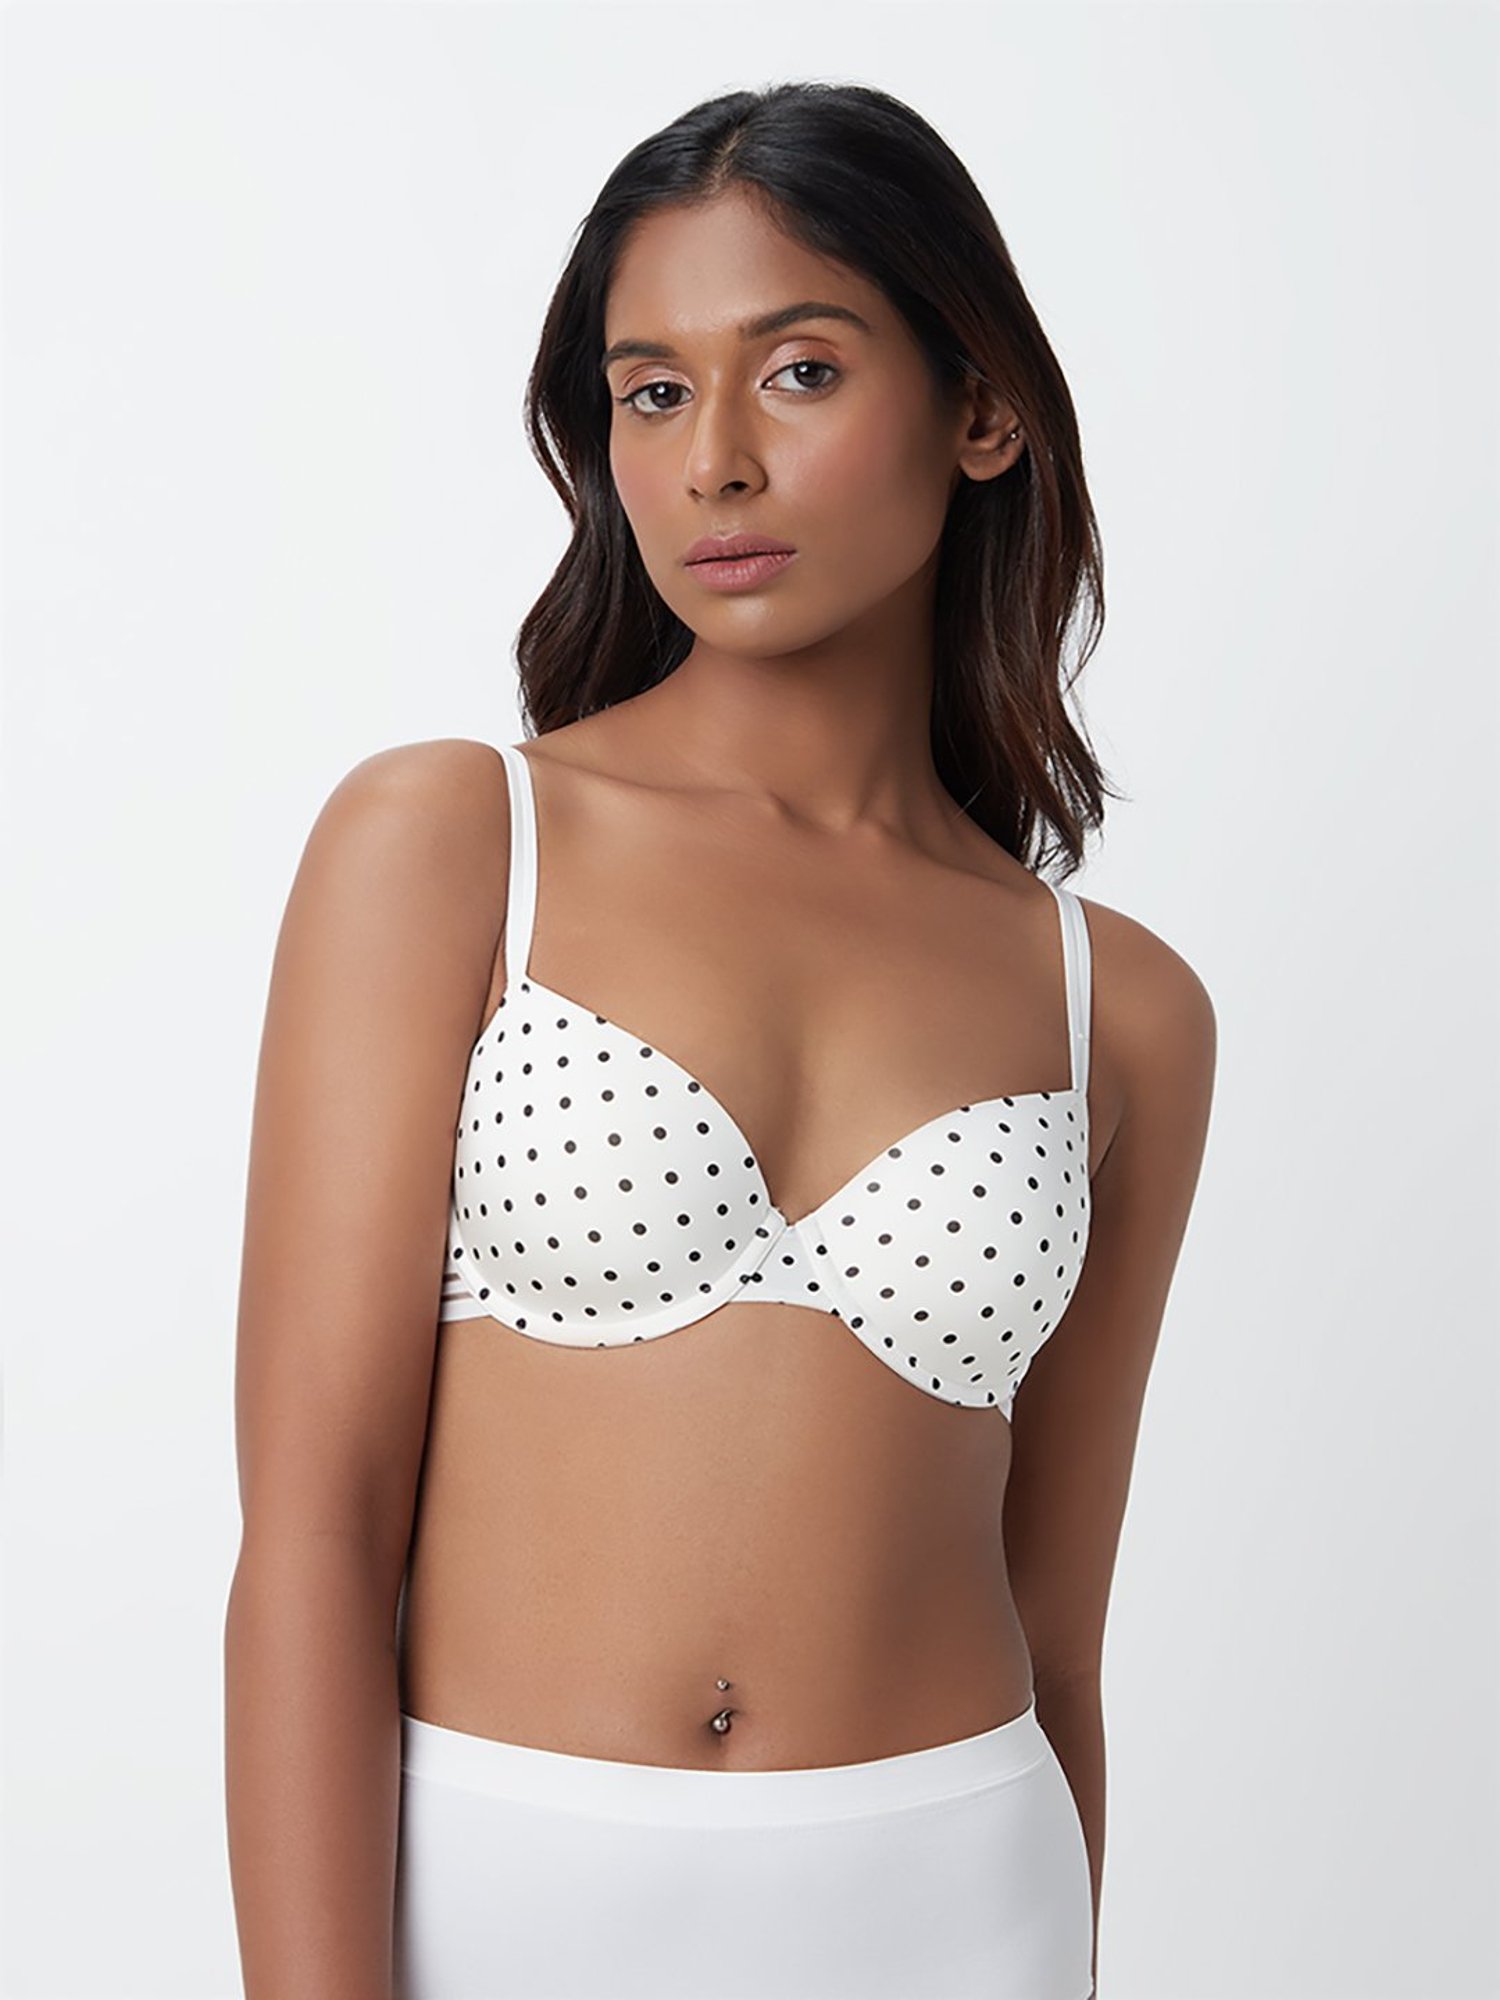 Westside - A perfect bra is two things, supportive and sexy! Find yours  with Wunderfit from Wunderlove. What's more? You can get a custom fitting  and enjoy Rs.100/- off on purchases of